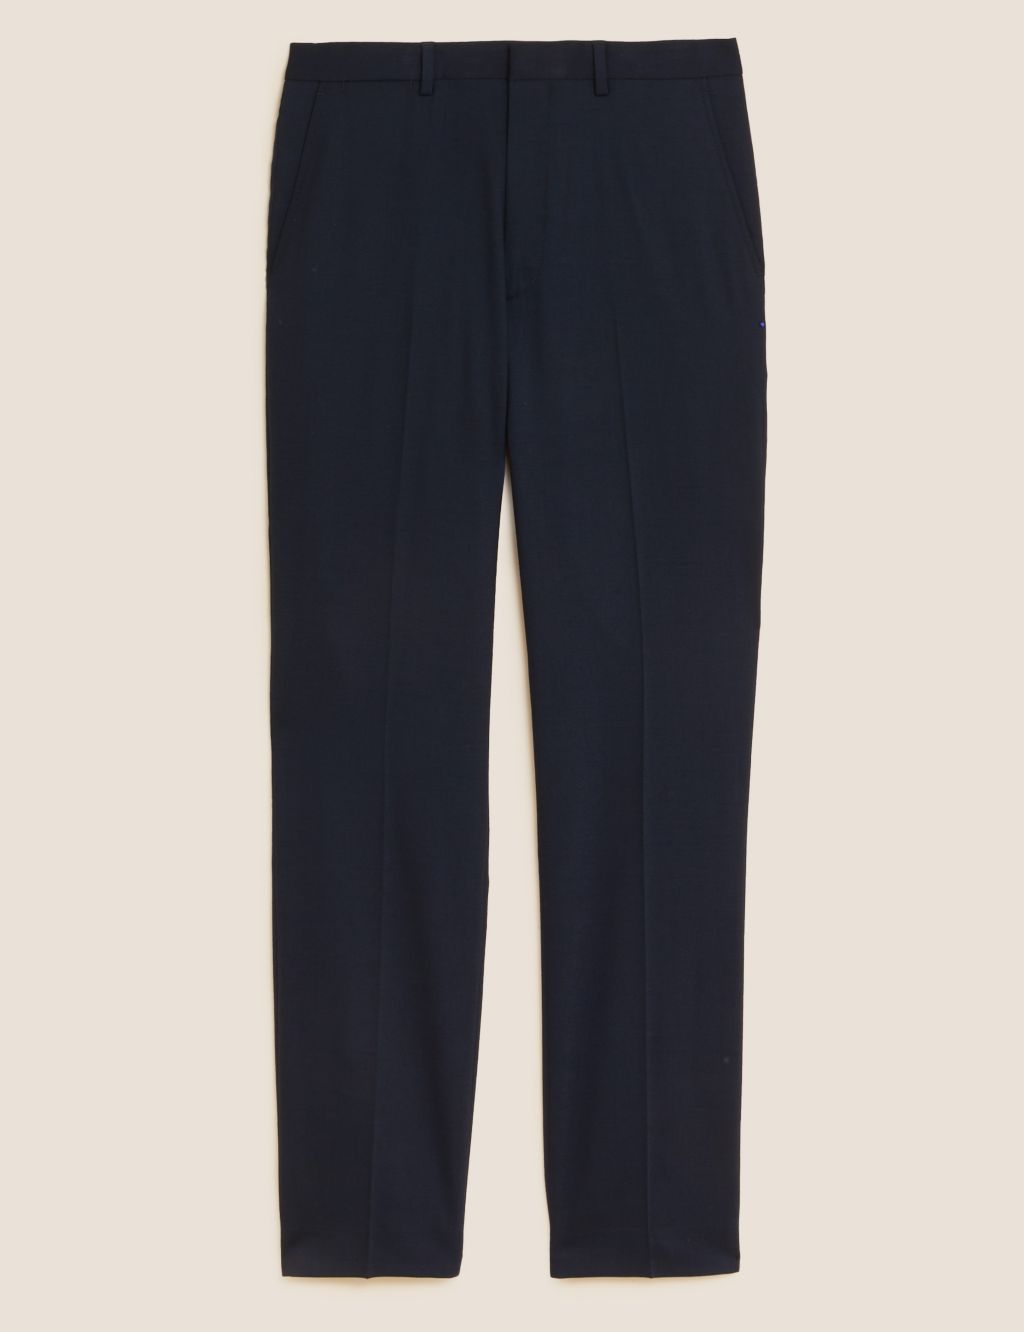 Regular Fit Wool Blend Flat Front Trousers image 6